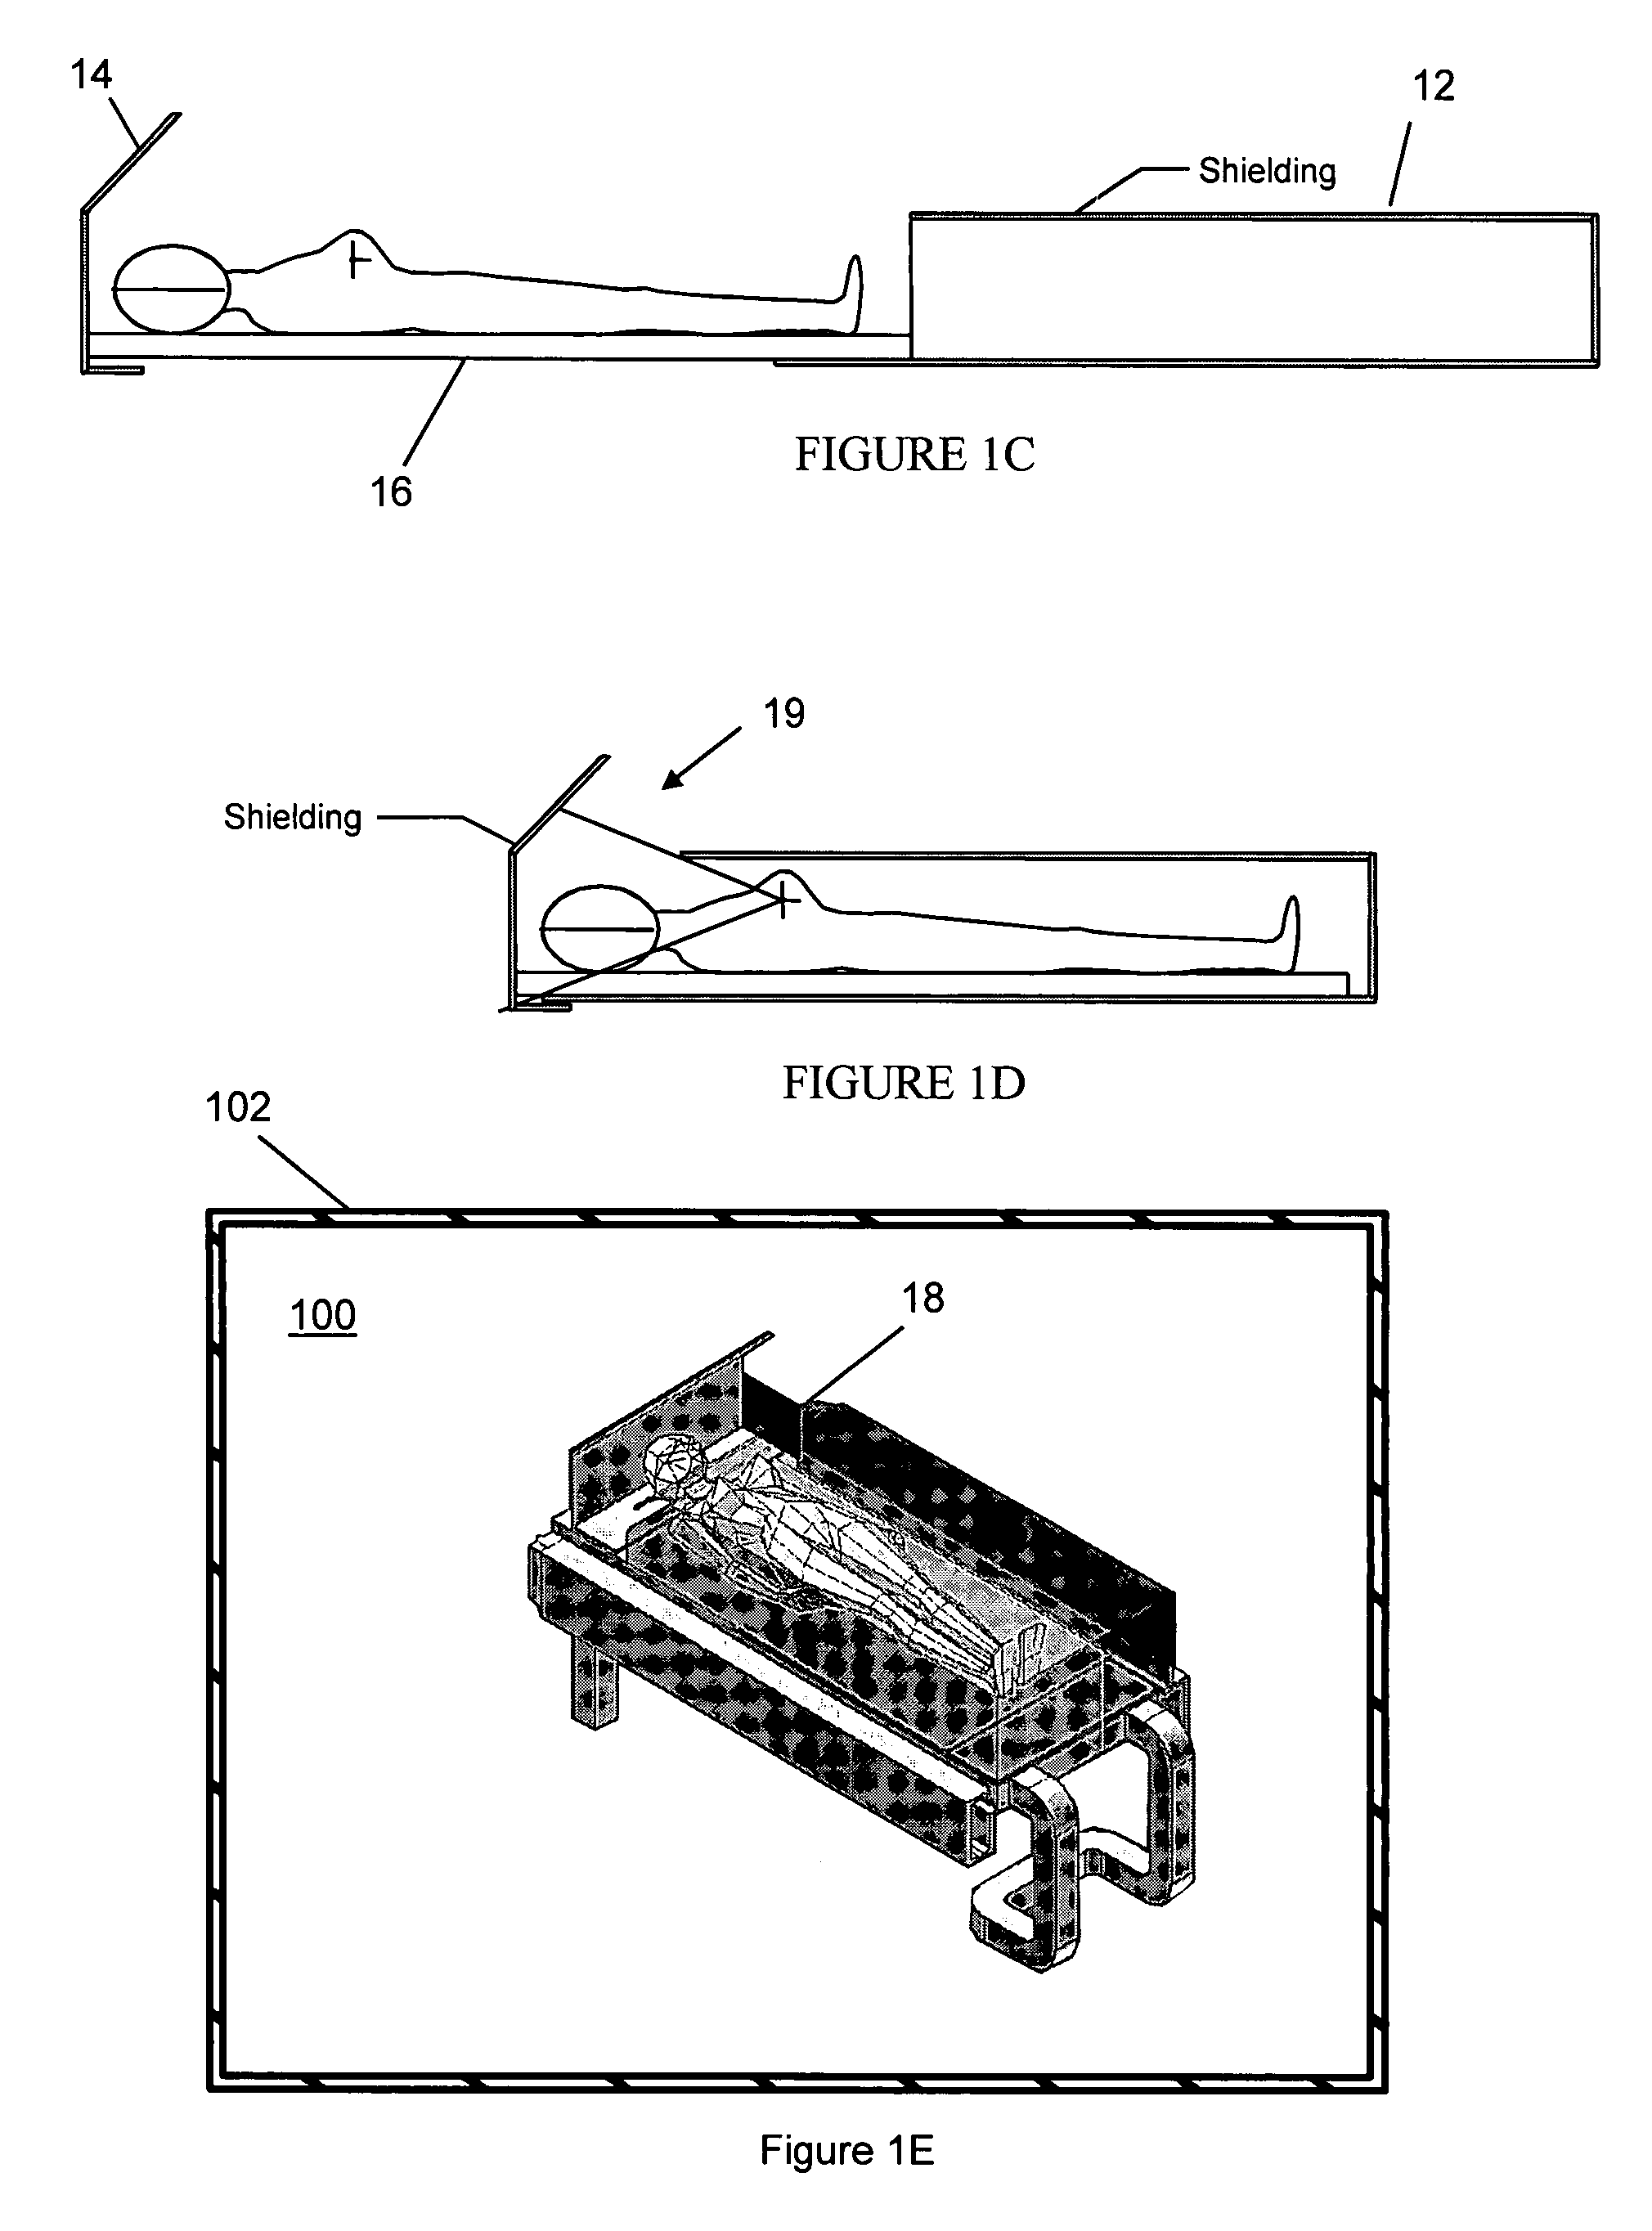 Shielded treatment environment for brachytherapy source